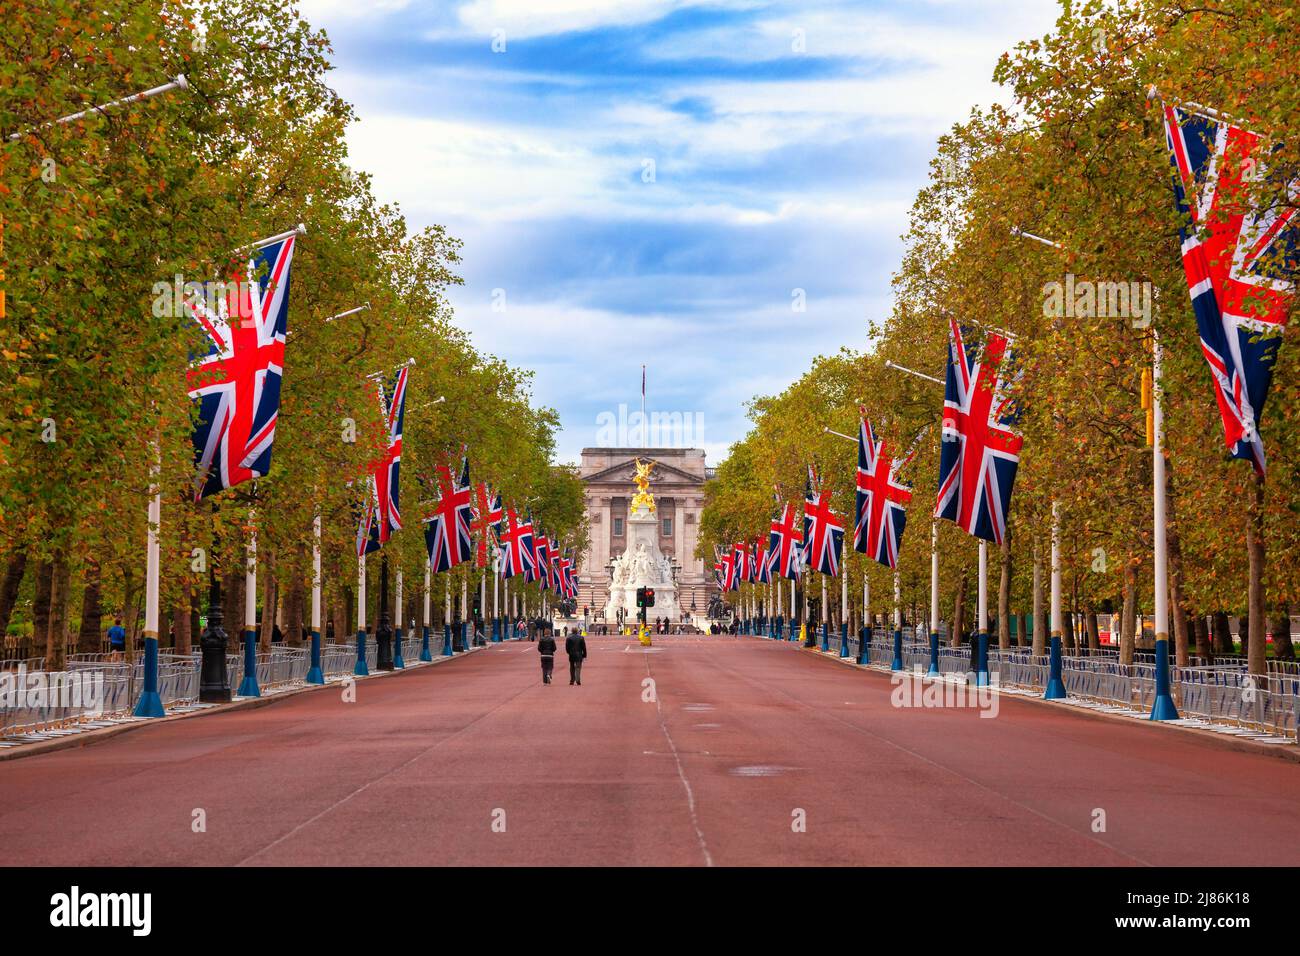 A view along the Mall, the landmark ceremonial approach road to Buckingham Palace decorated with Union Jack flags in City of Westminster, central Lond Stock Photo